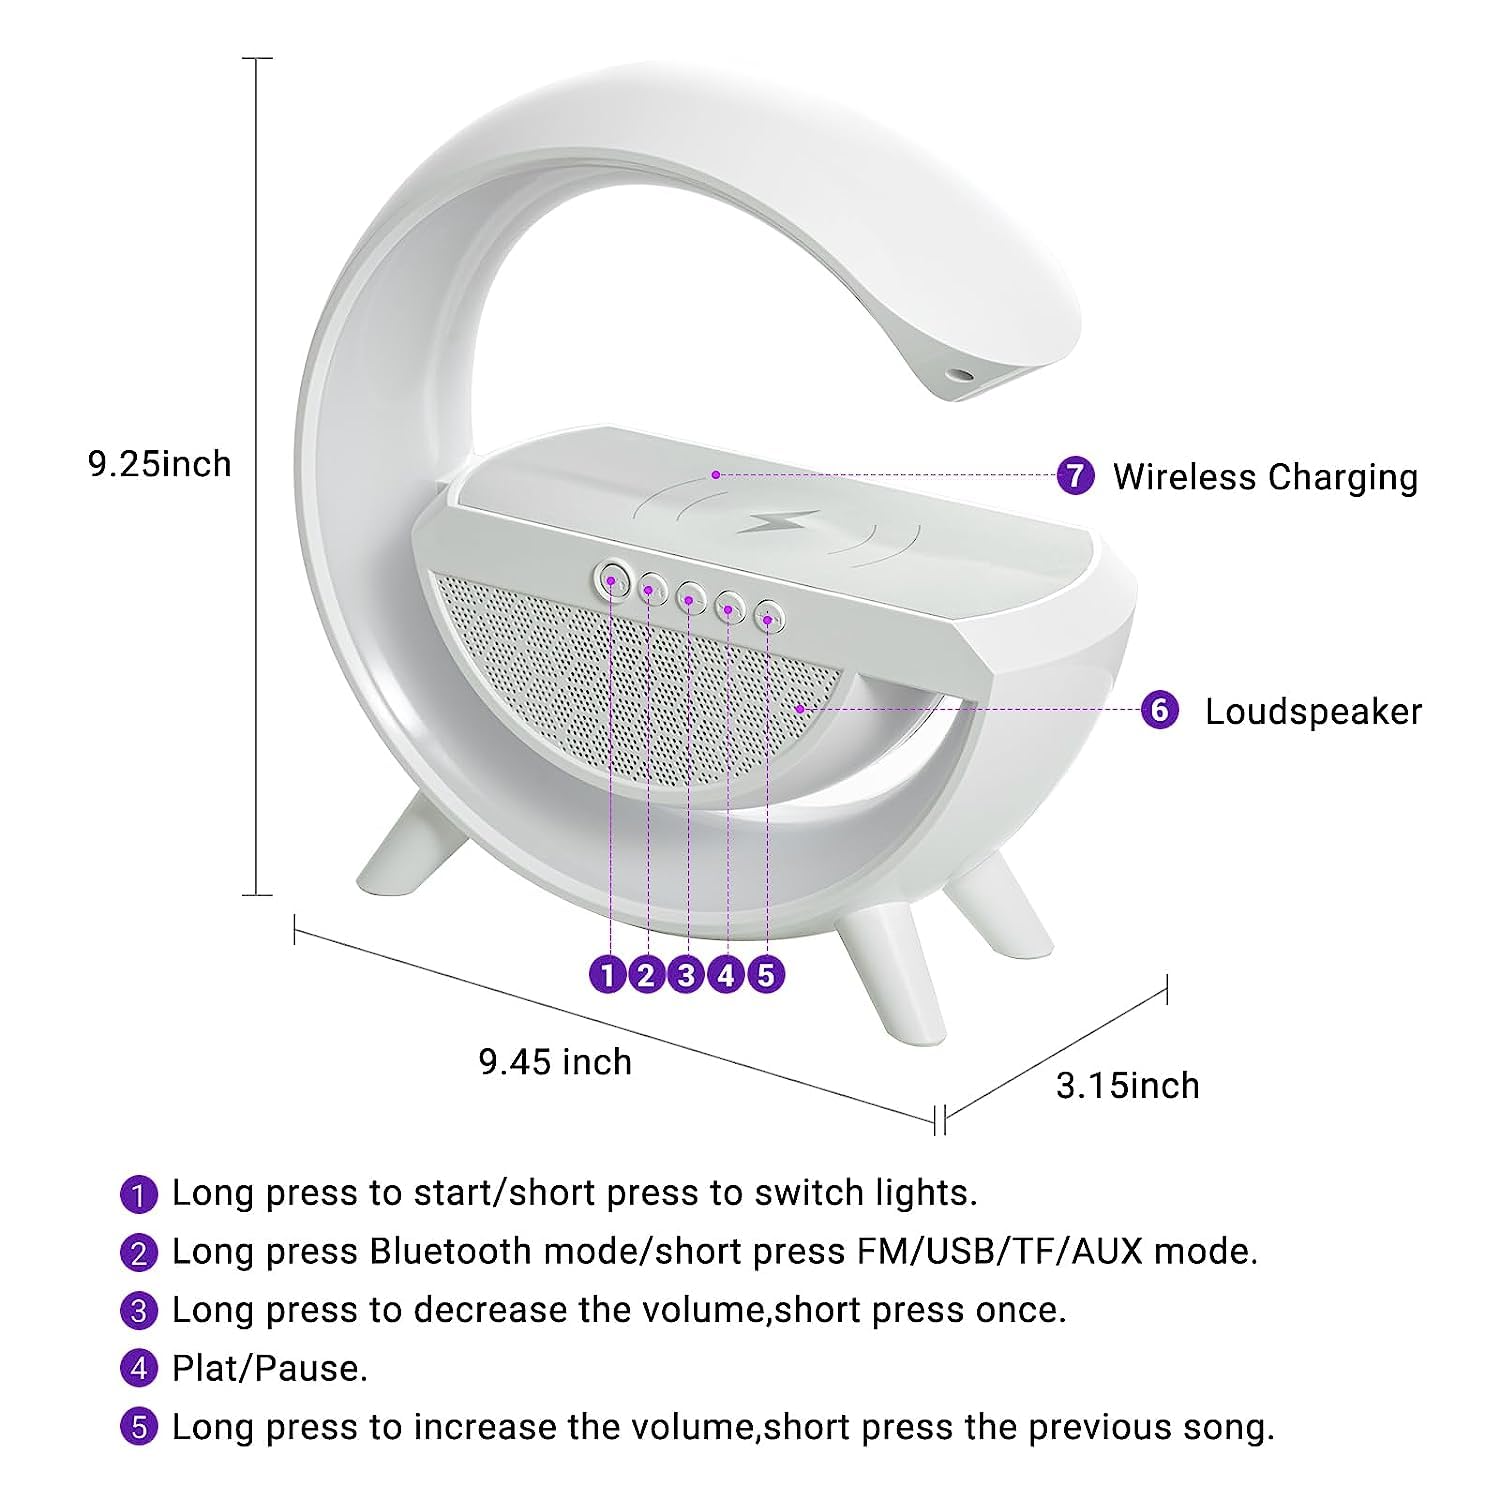 1301 3-in-1 Multi-Function LED Night Lamp with Bluetooth Speaker, Wireless Charging, for Bedroom for Music, Party and Mood Lighting - Perfect Gift for All Occasions  blootuth speaker (Media Player)